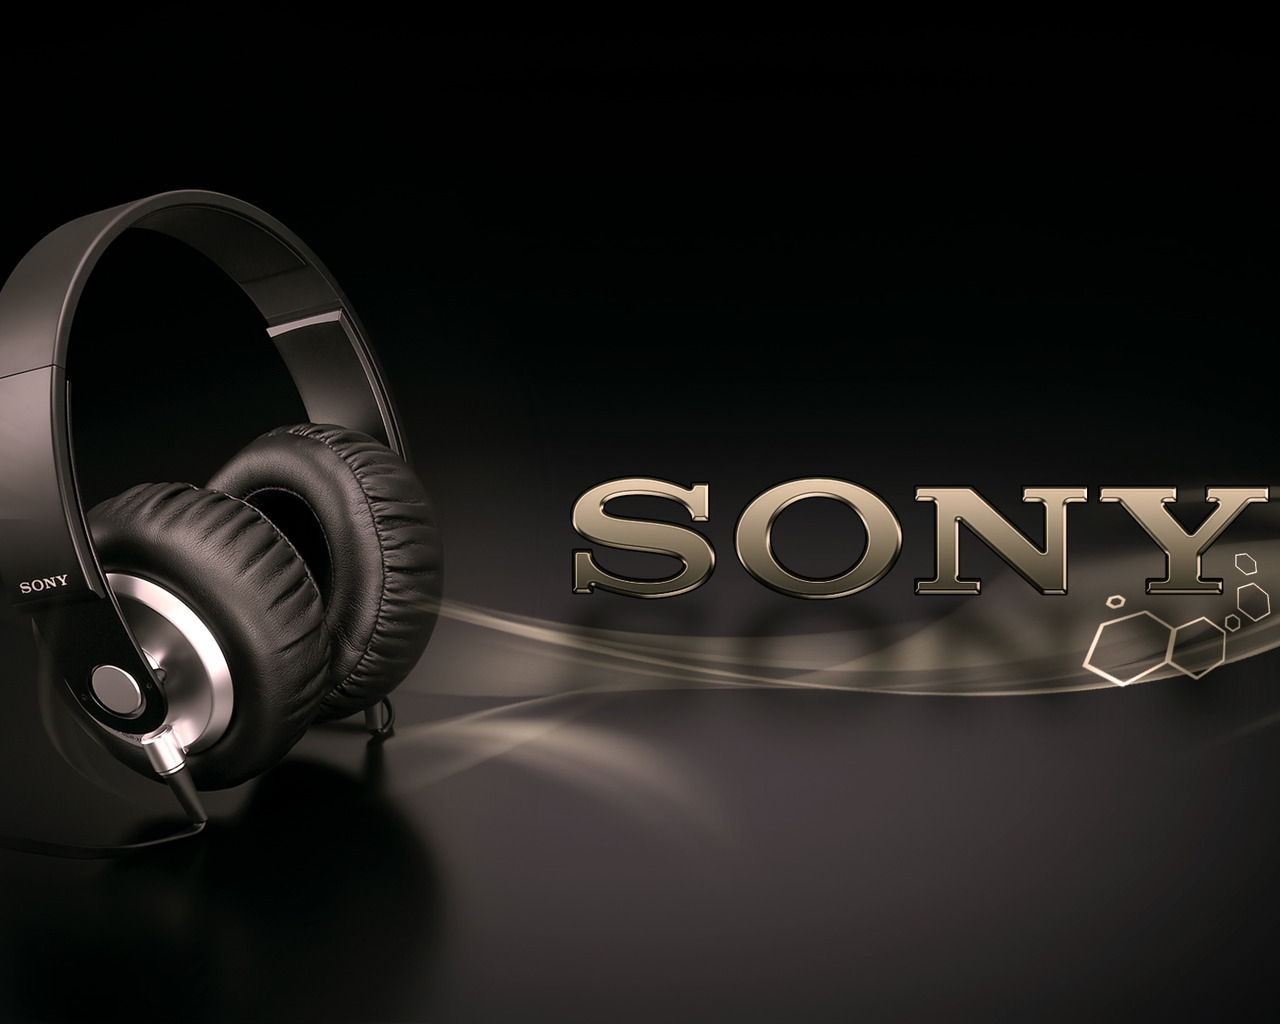 Cool Sony Headphones for 1280 x 1024 resolution